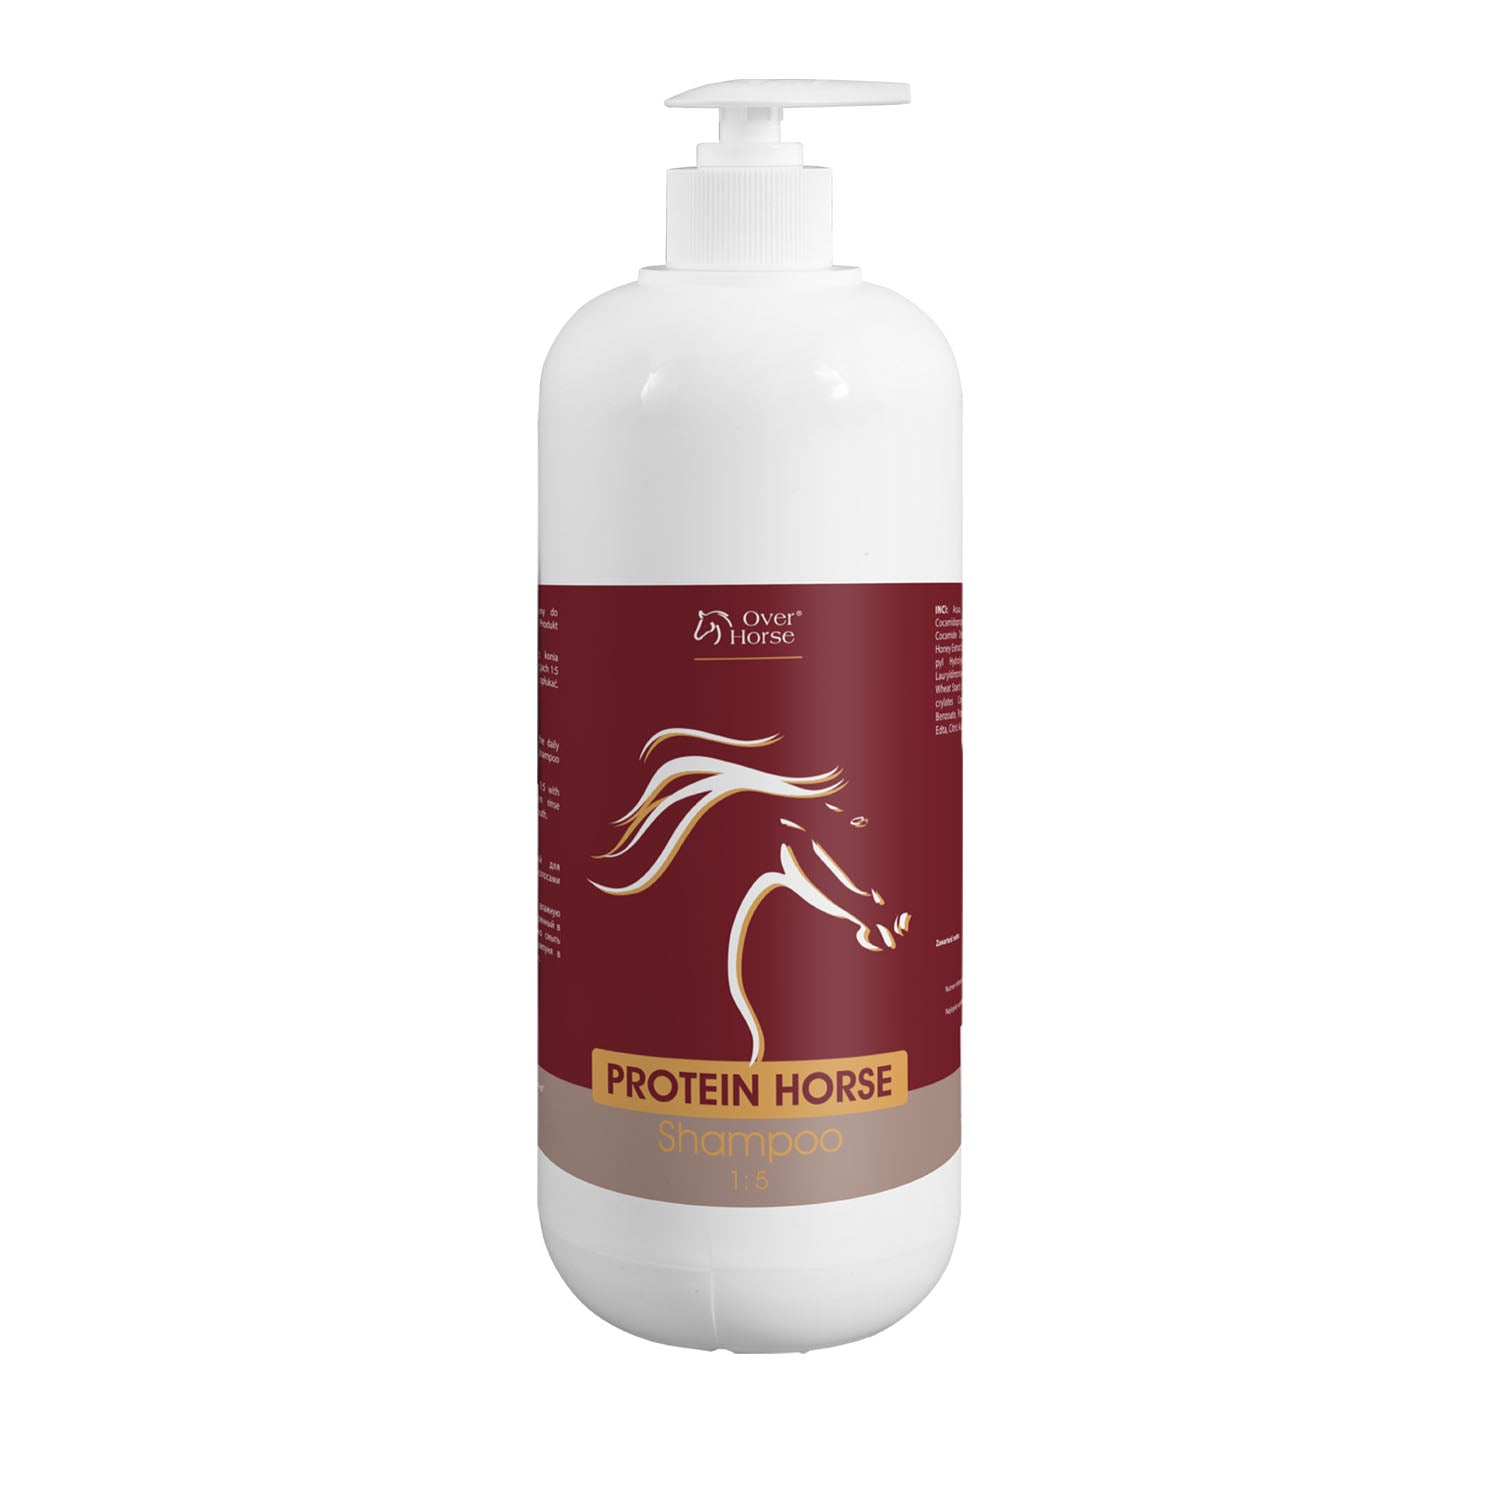 Over Horse Protein Horse Shampoo 1L